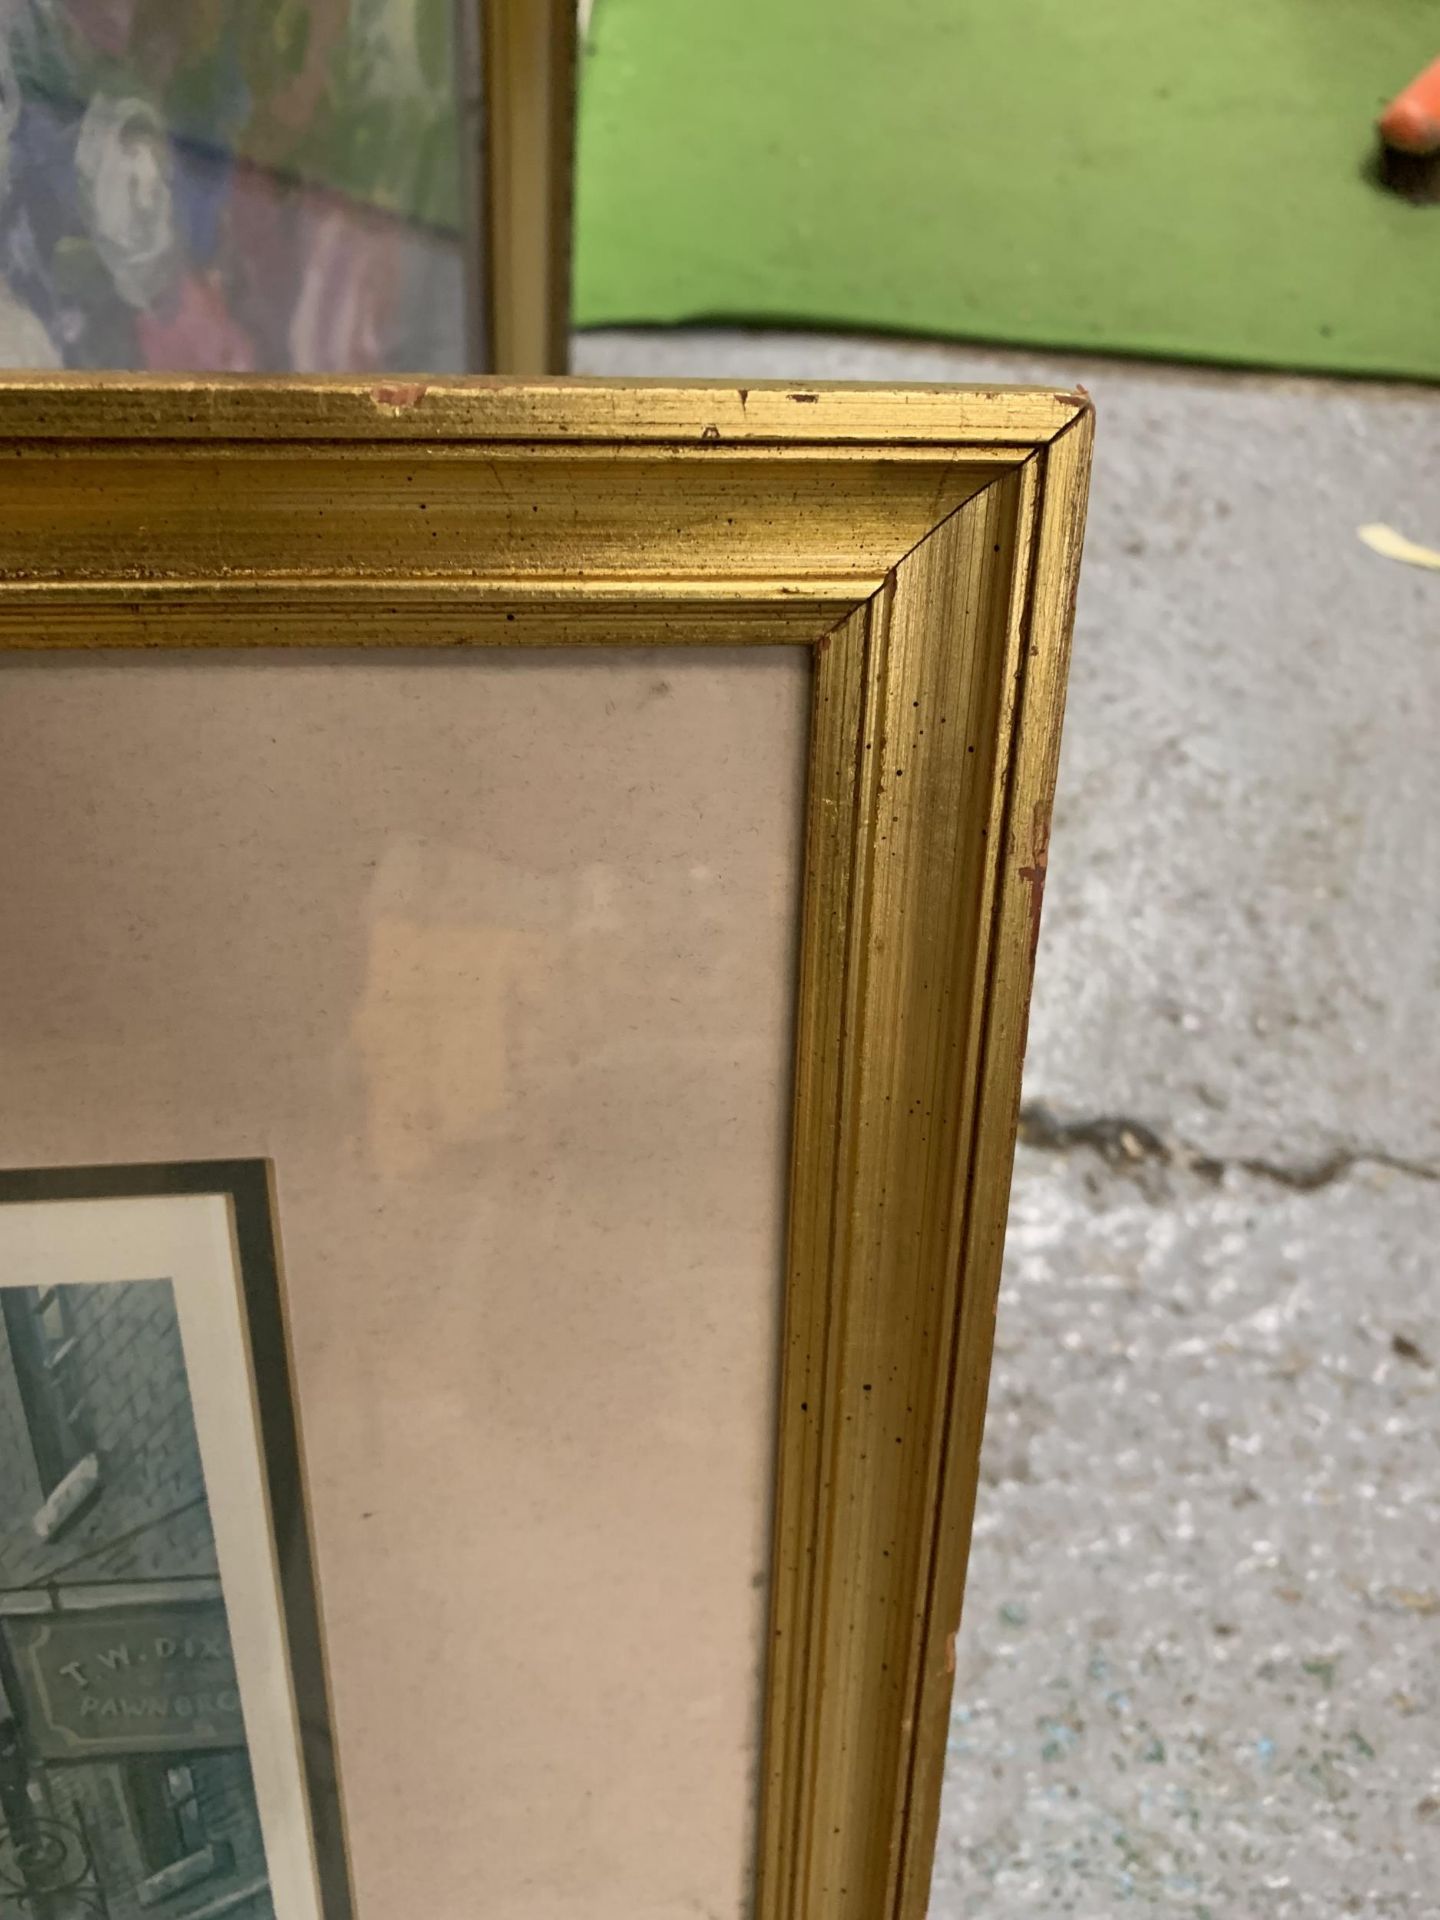 THREE GILT FRAMED PRINTS, TWO STILL LIFE FLOWERS AND FRUITS, THE OTHER A VICTORIAN STREET SCENE - Image 6 of 6